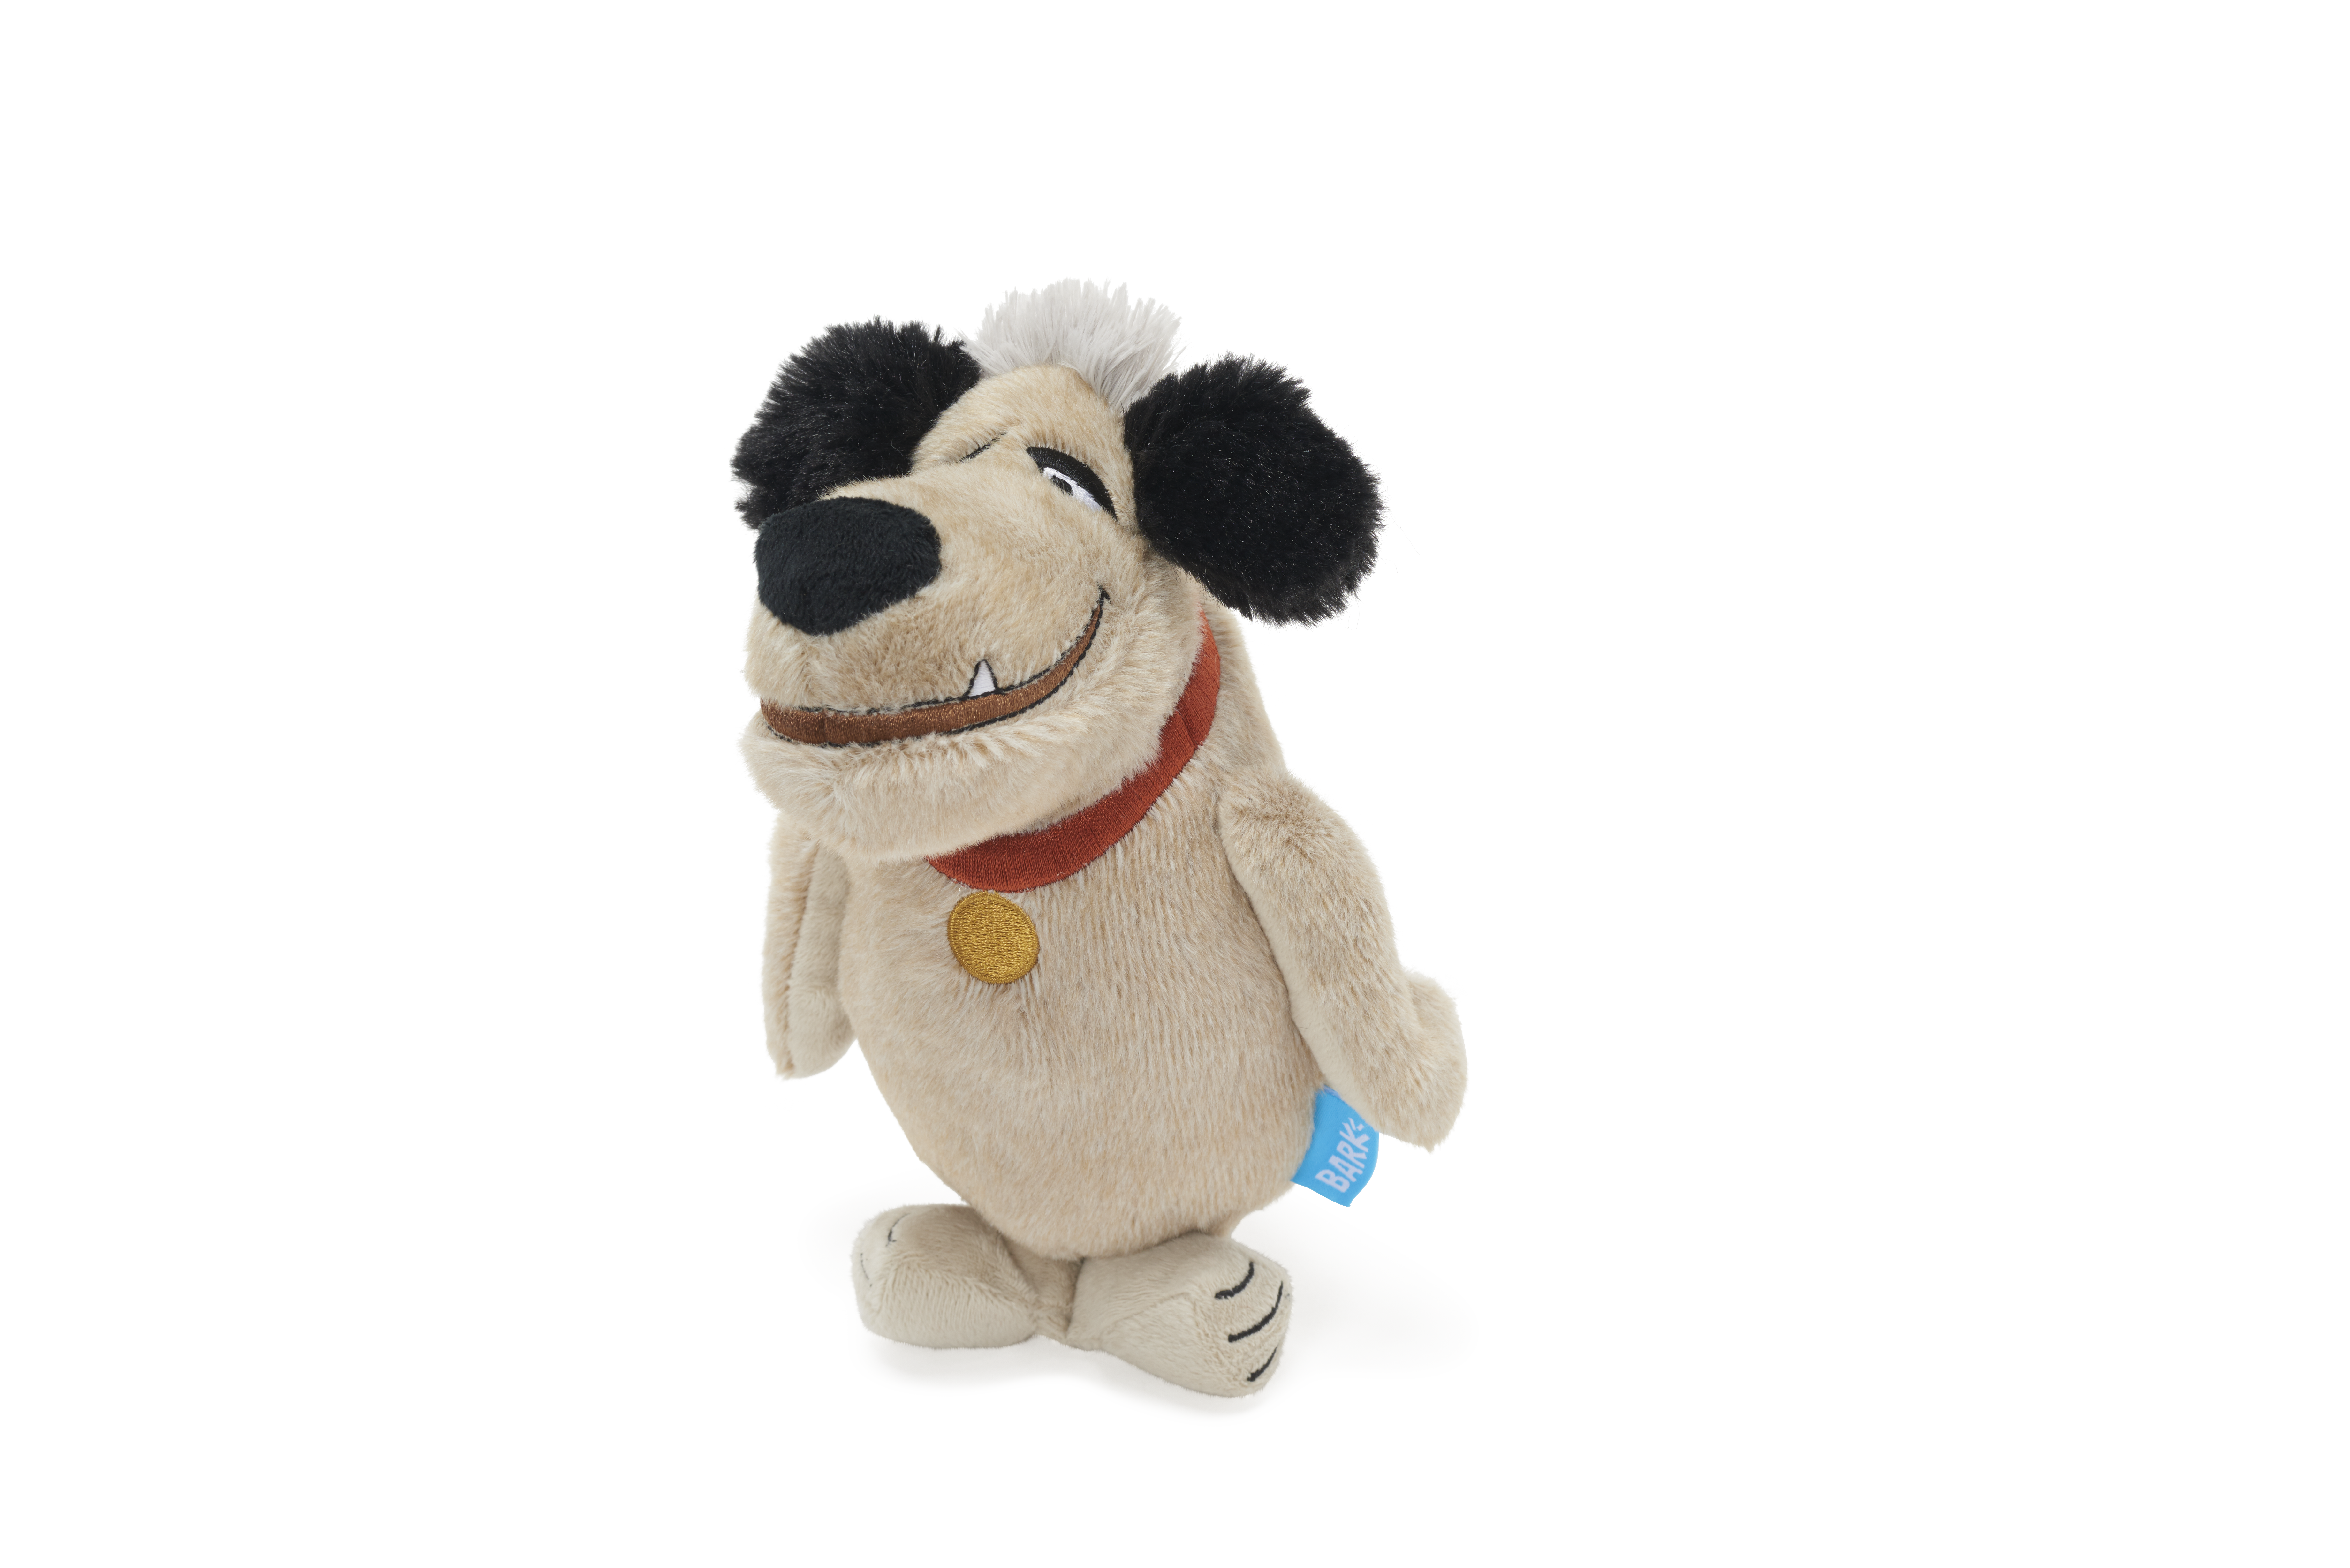 Photograph of BarkBox’s Muttley product